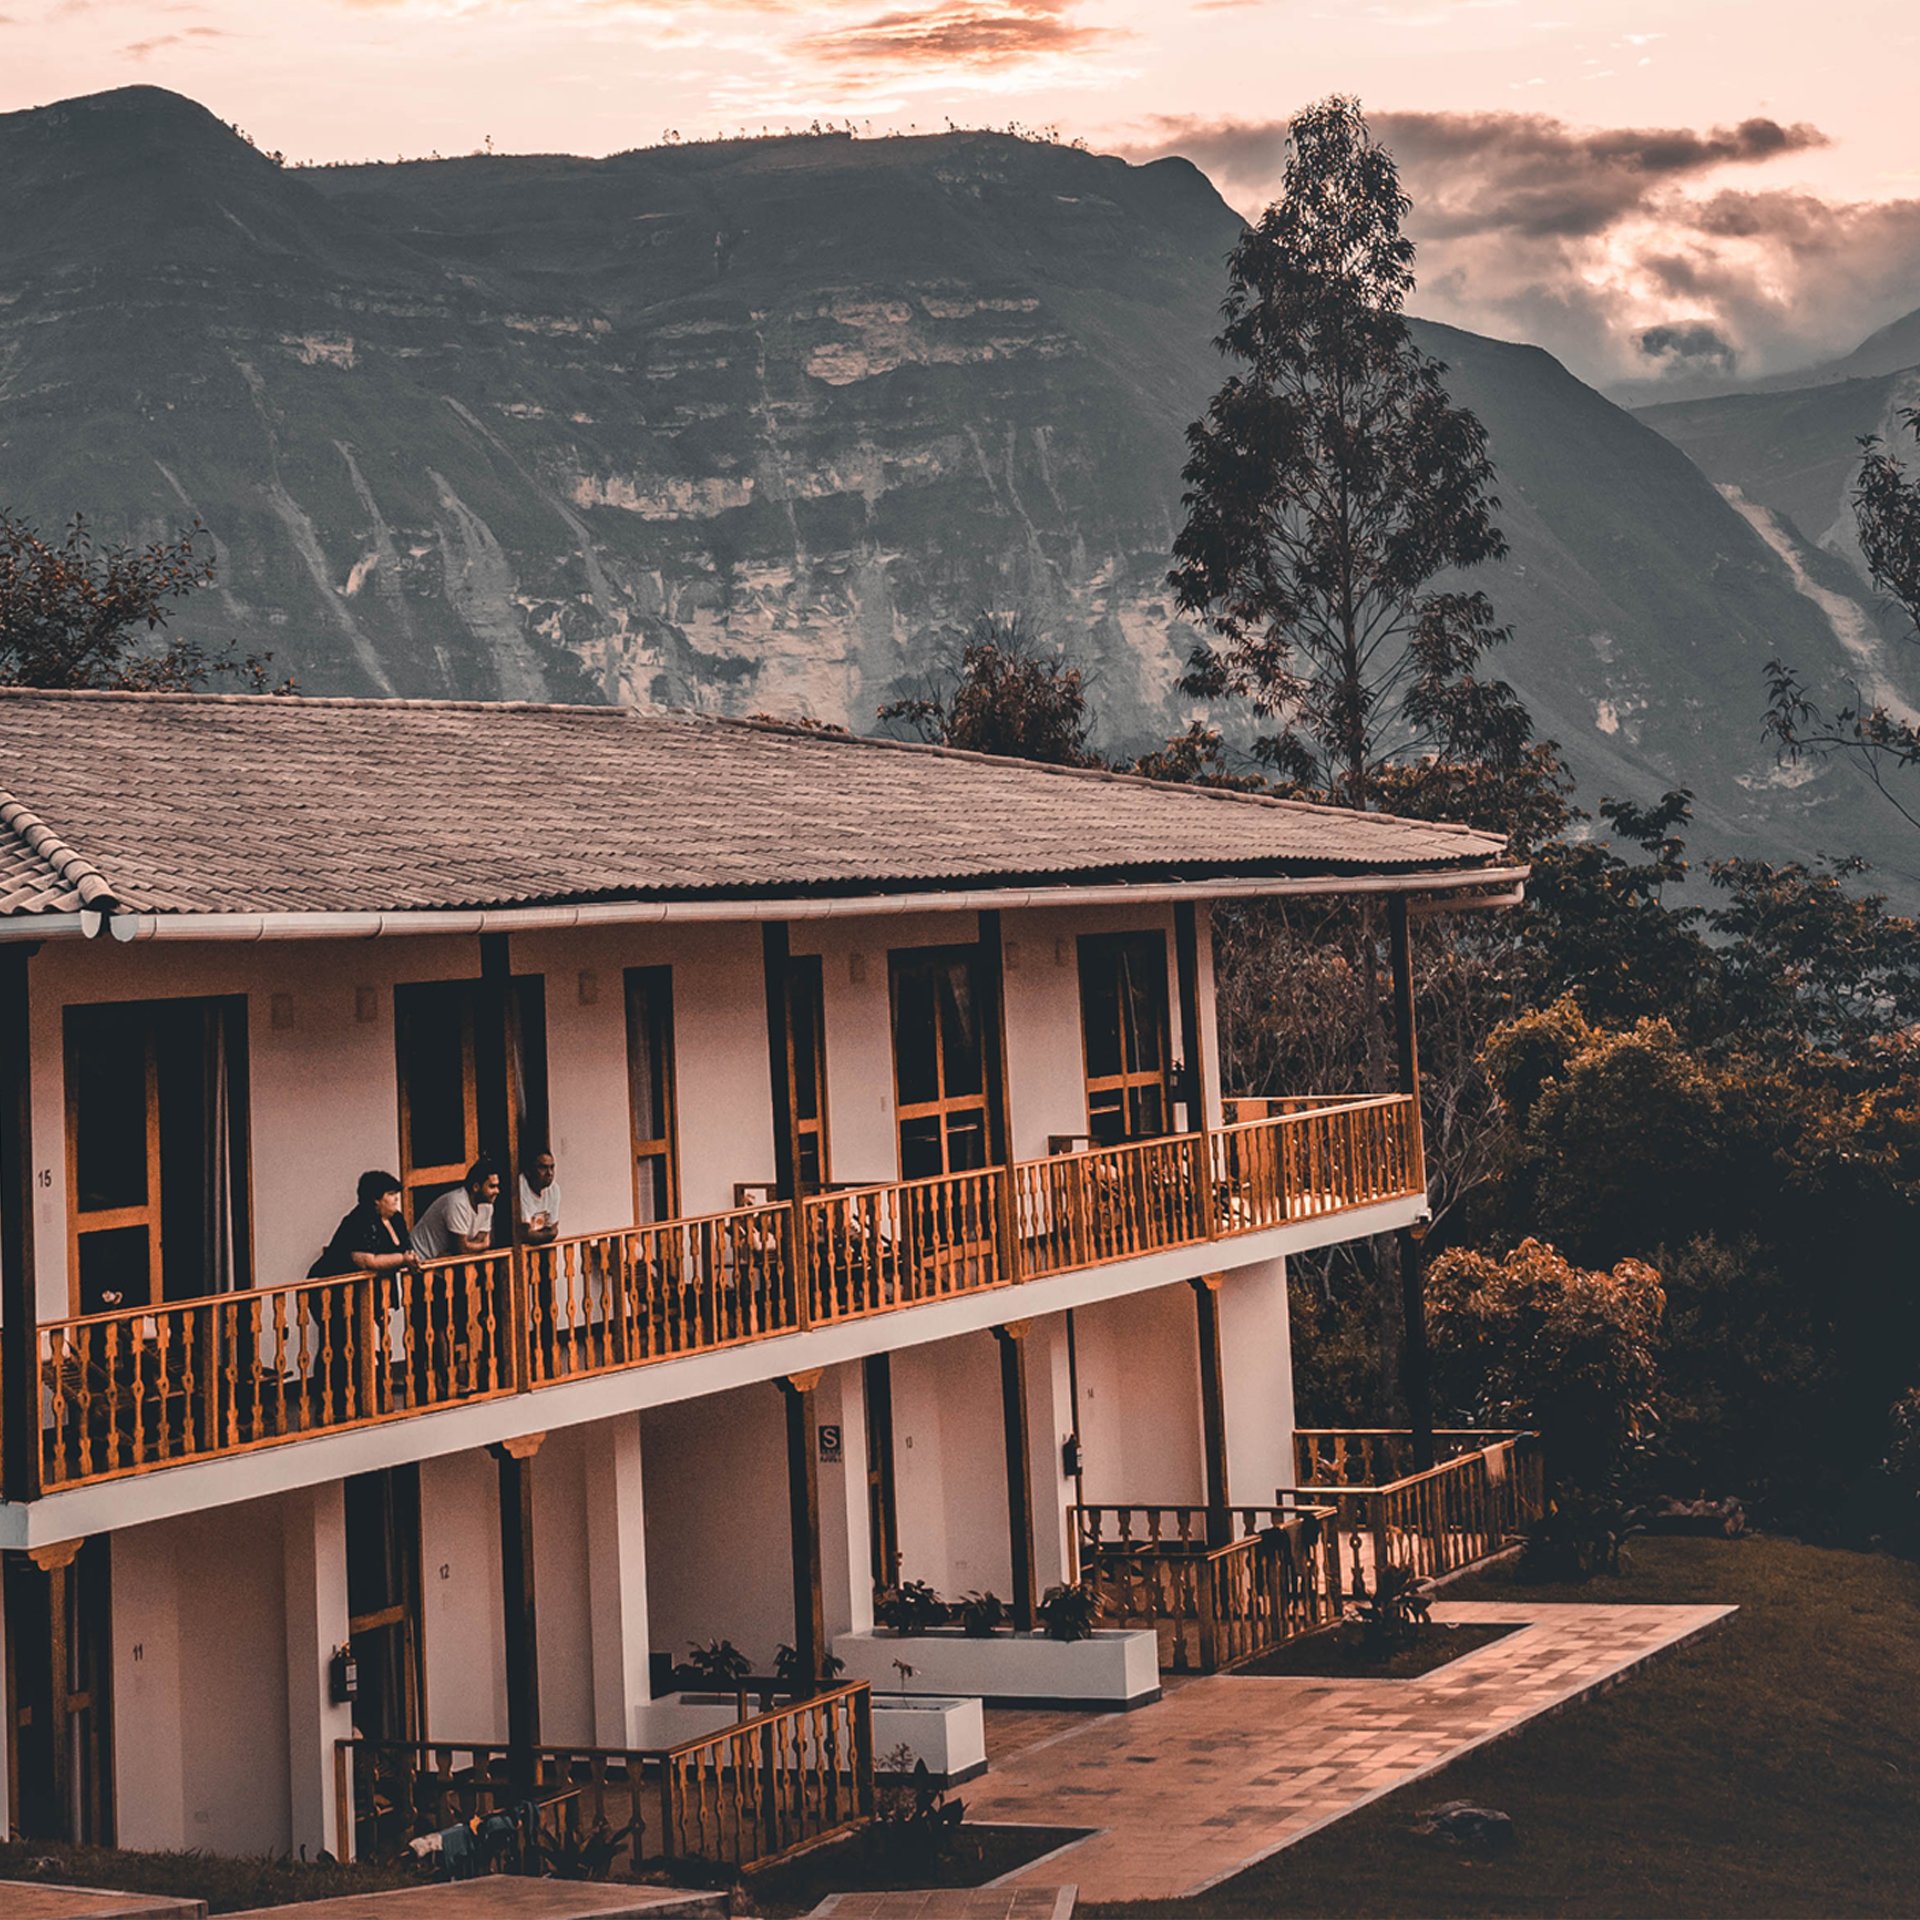 stay in beautiful mountain lodges during your machu picchu travel expereince